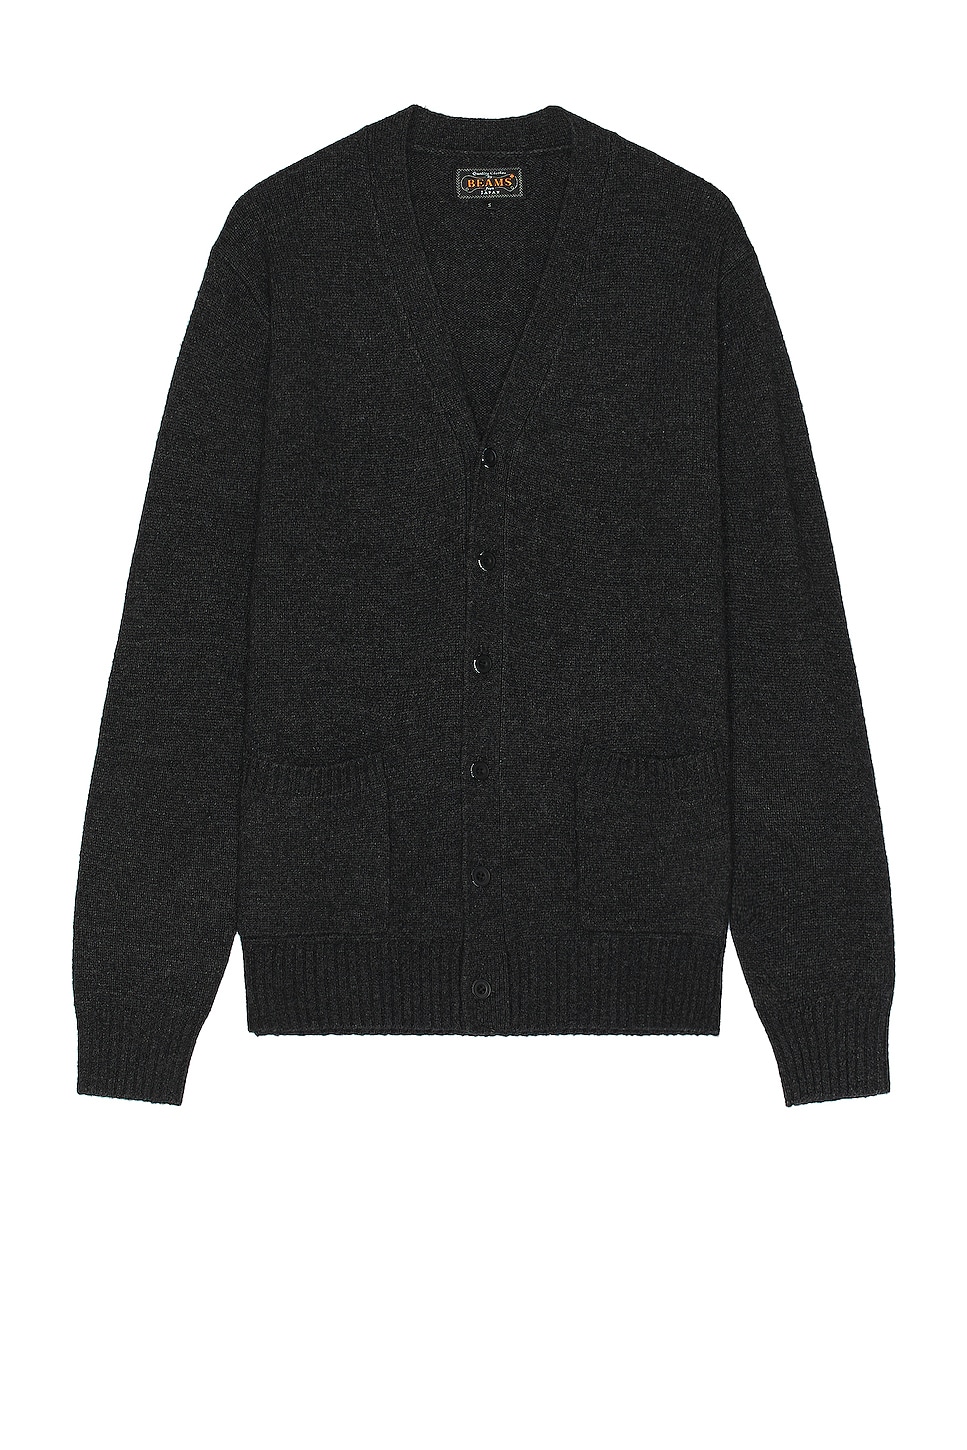 Image 1 of Beams Plus Cardigan Elbow Patch 7g in Charcoal